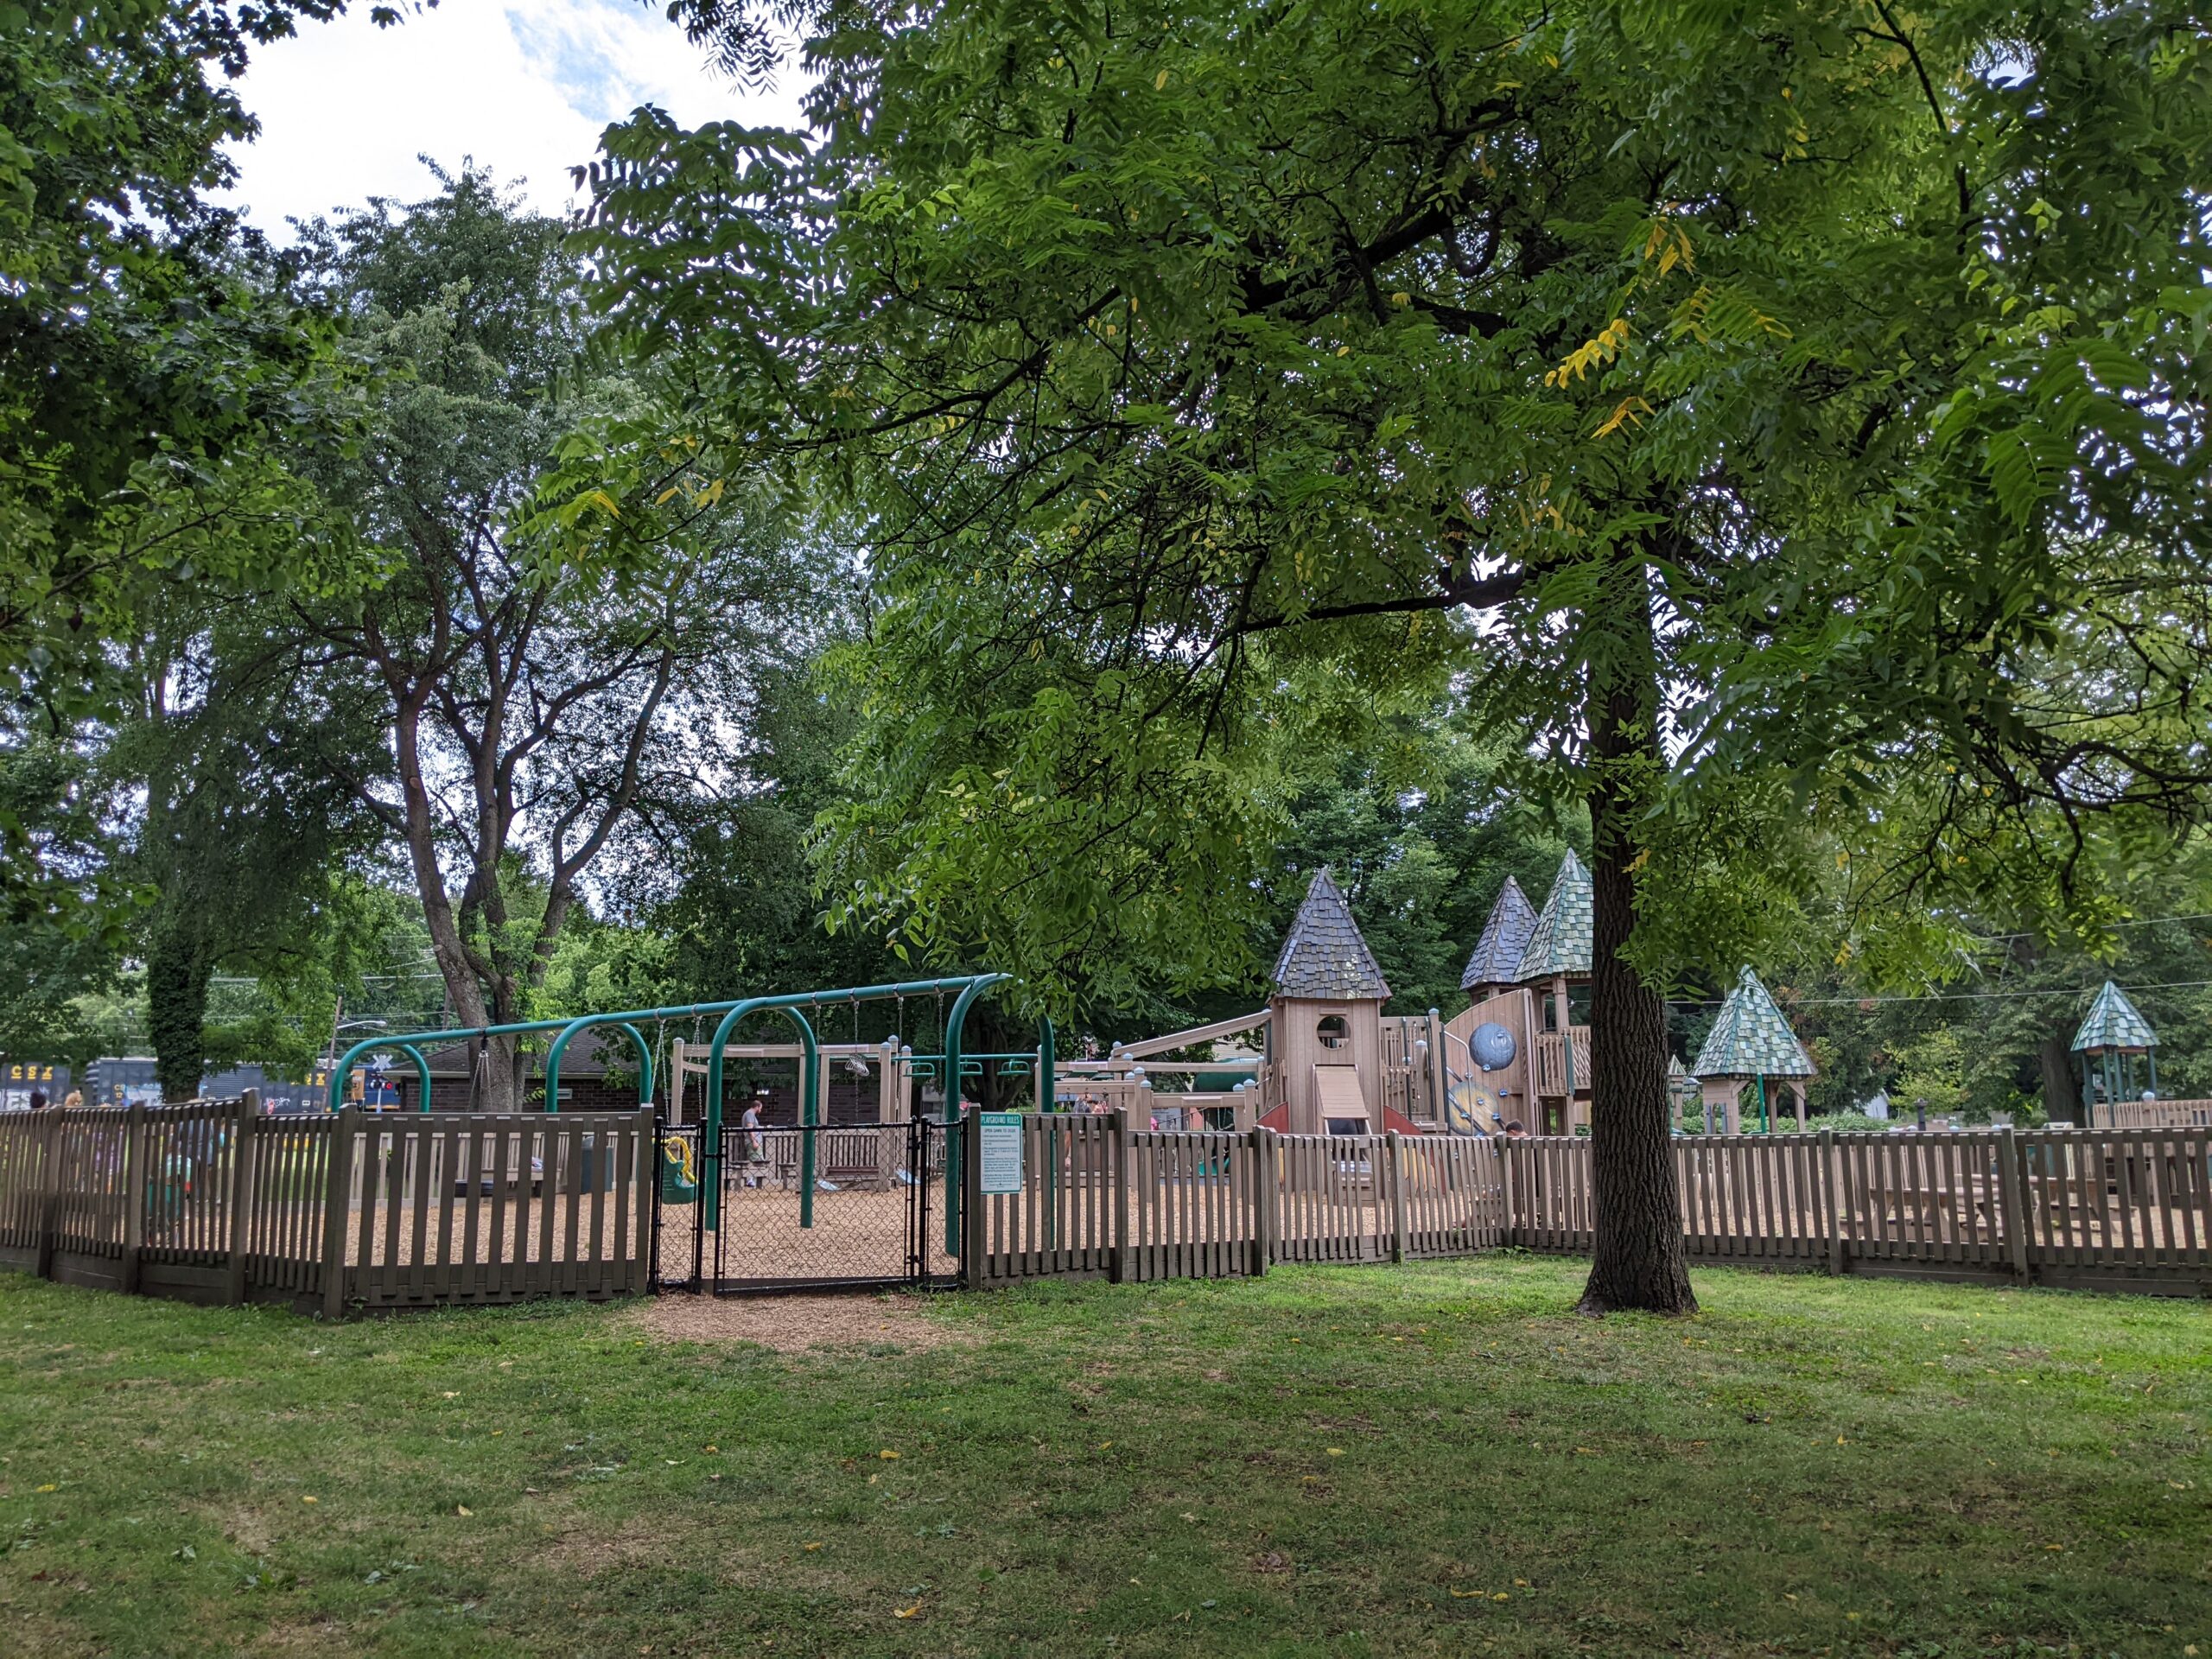 Frank Fullerton Memorial Park Playground in Moorestown NJ - WIDE image - back of playground with fencing